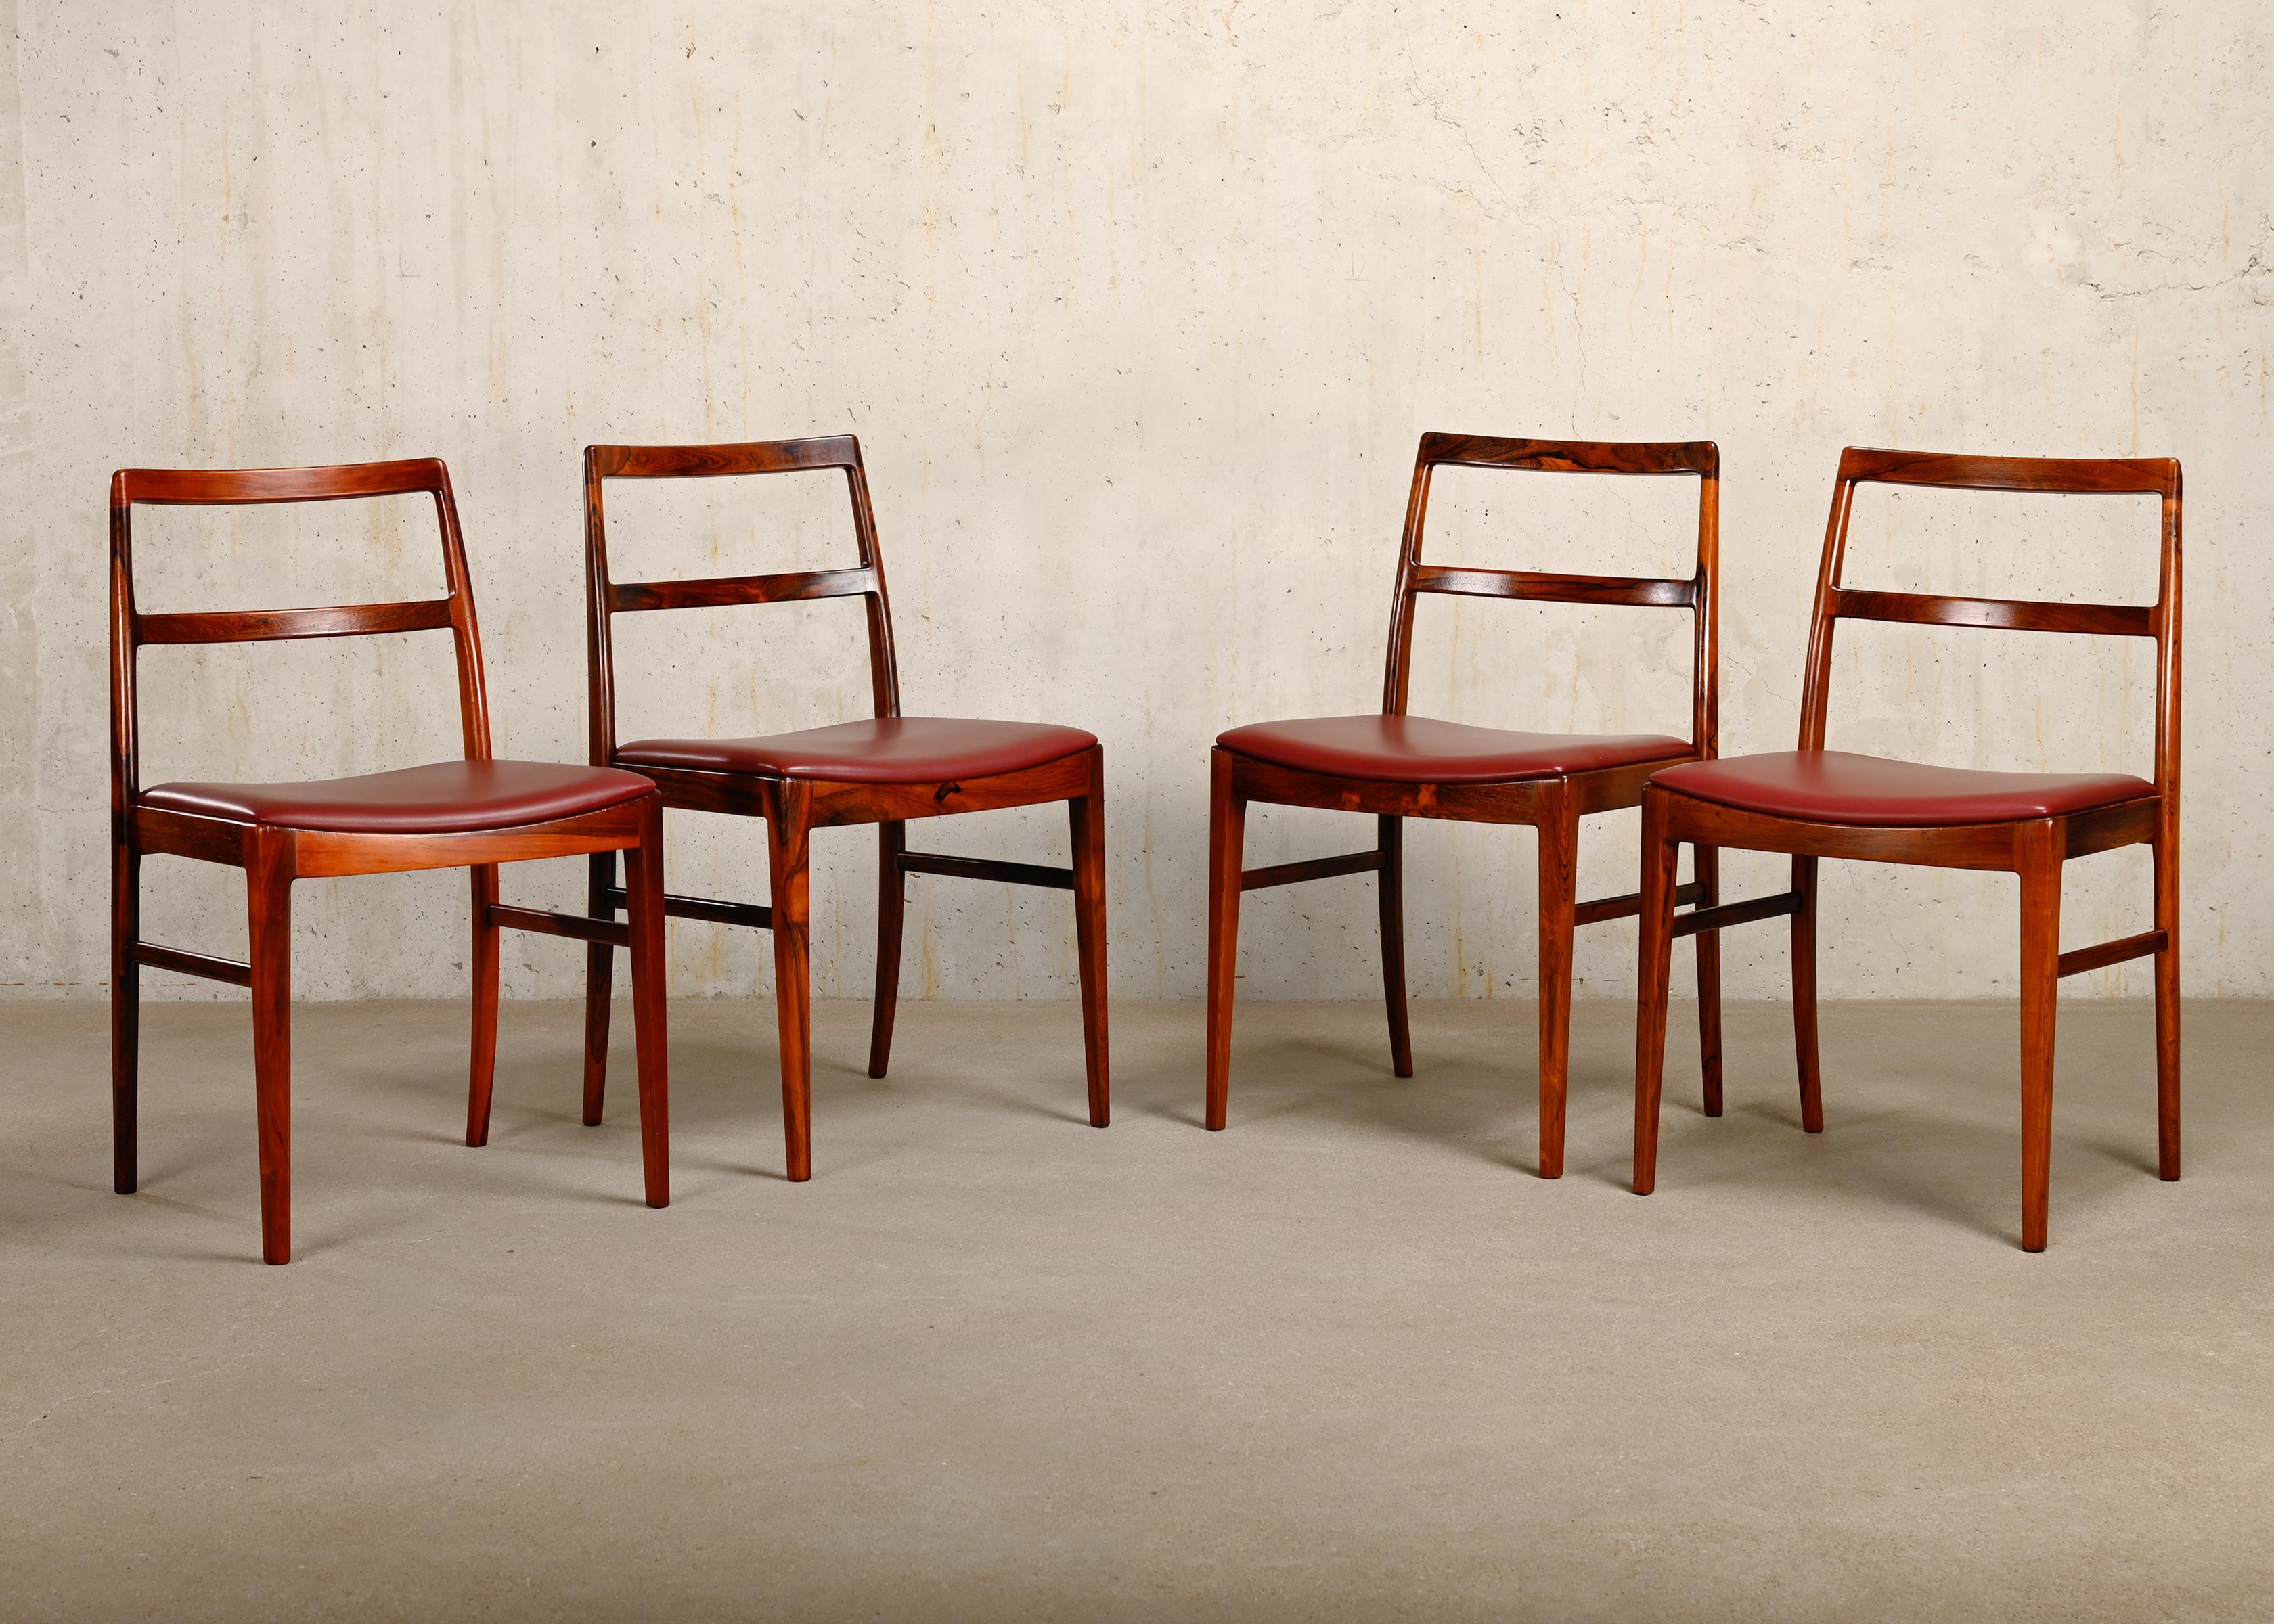 Graceful set of four dining chairs designed by Arne Vodder for Sibast Møbler, Denmark. Nicely shaped rosewood frames by hand manufactured with great craftsmanship. Very good original condition with sturdy rosewood frames and leather cushions. The